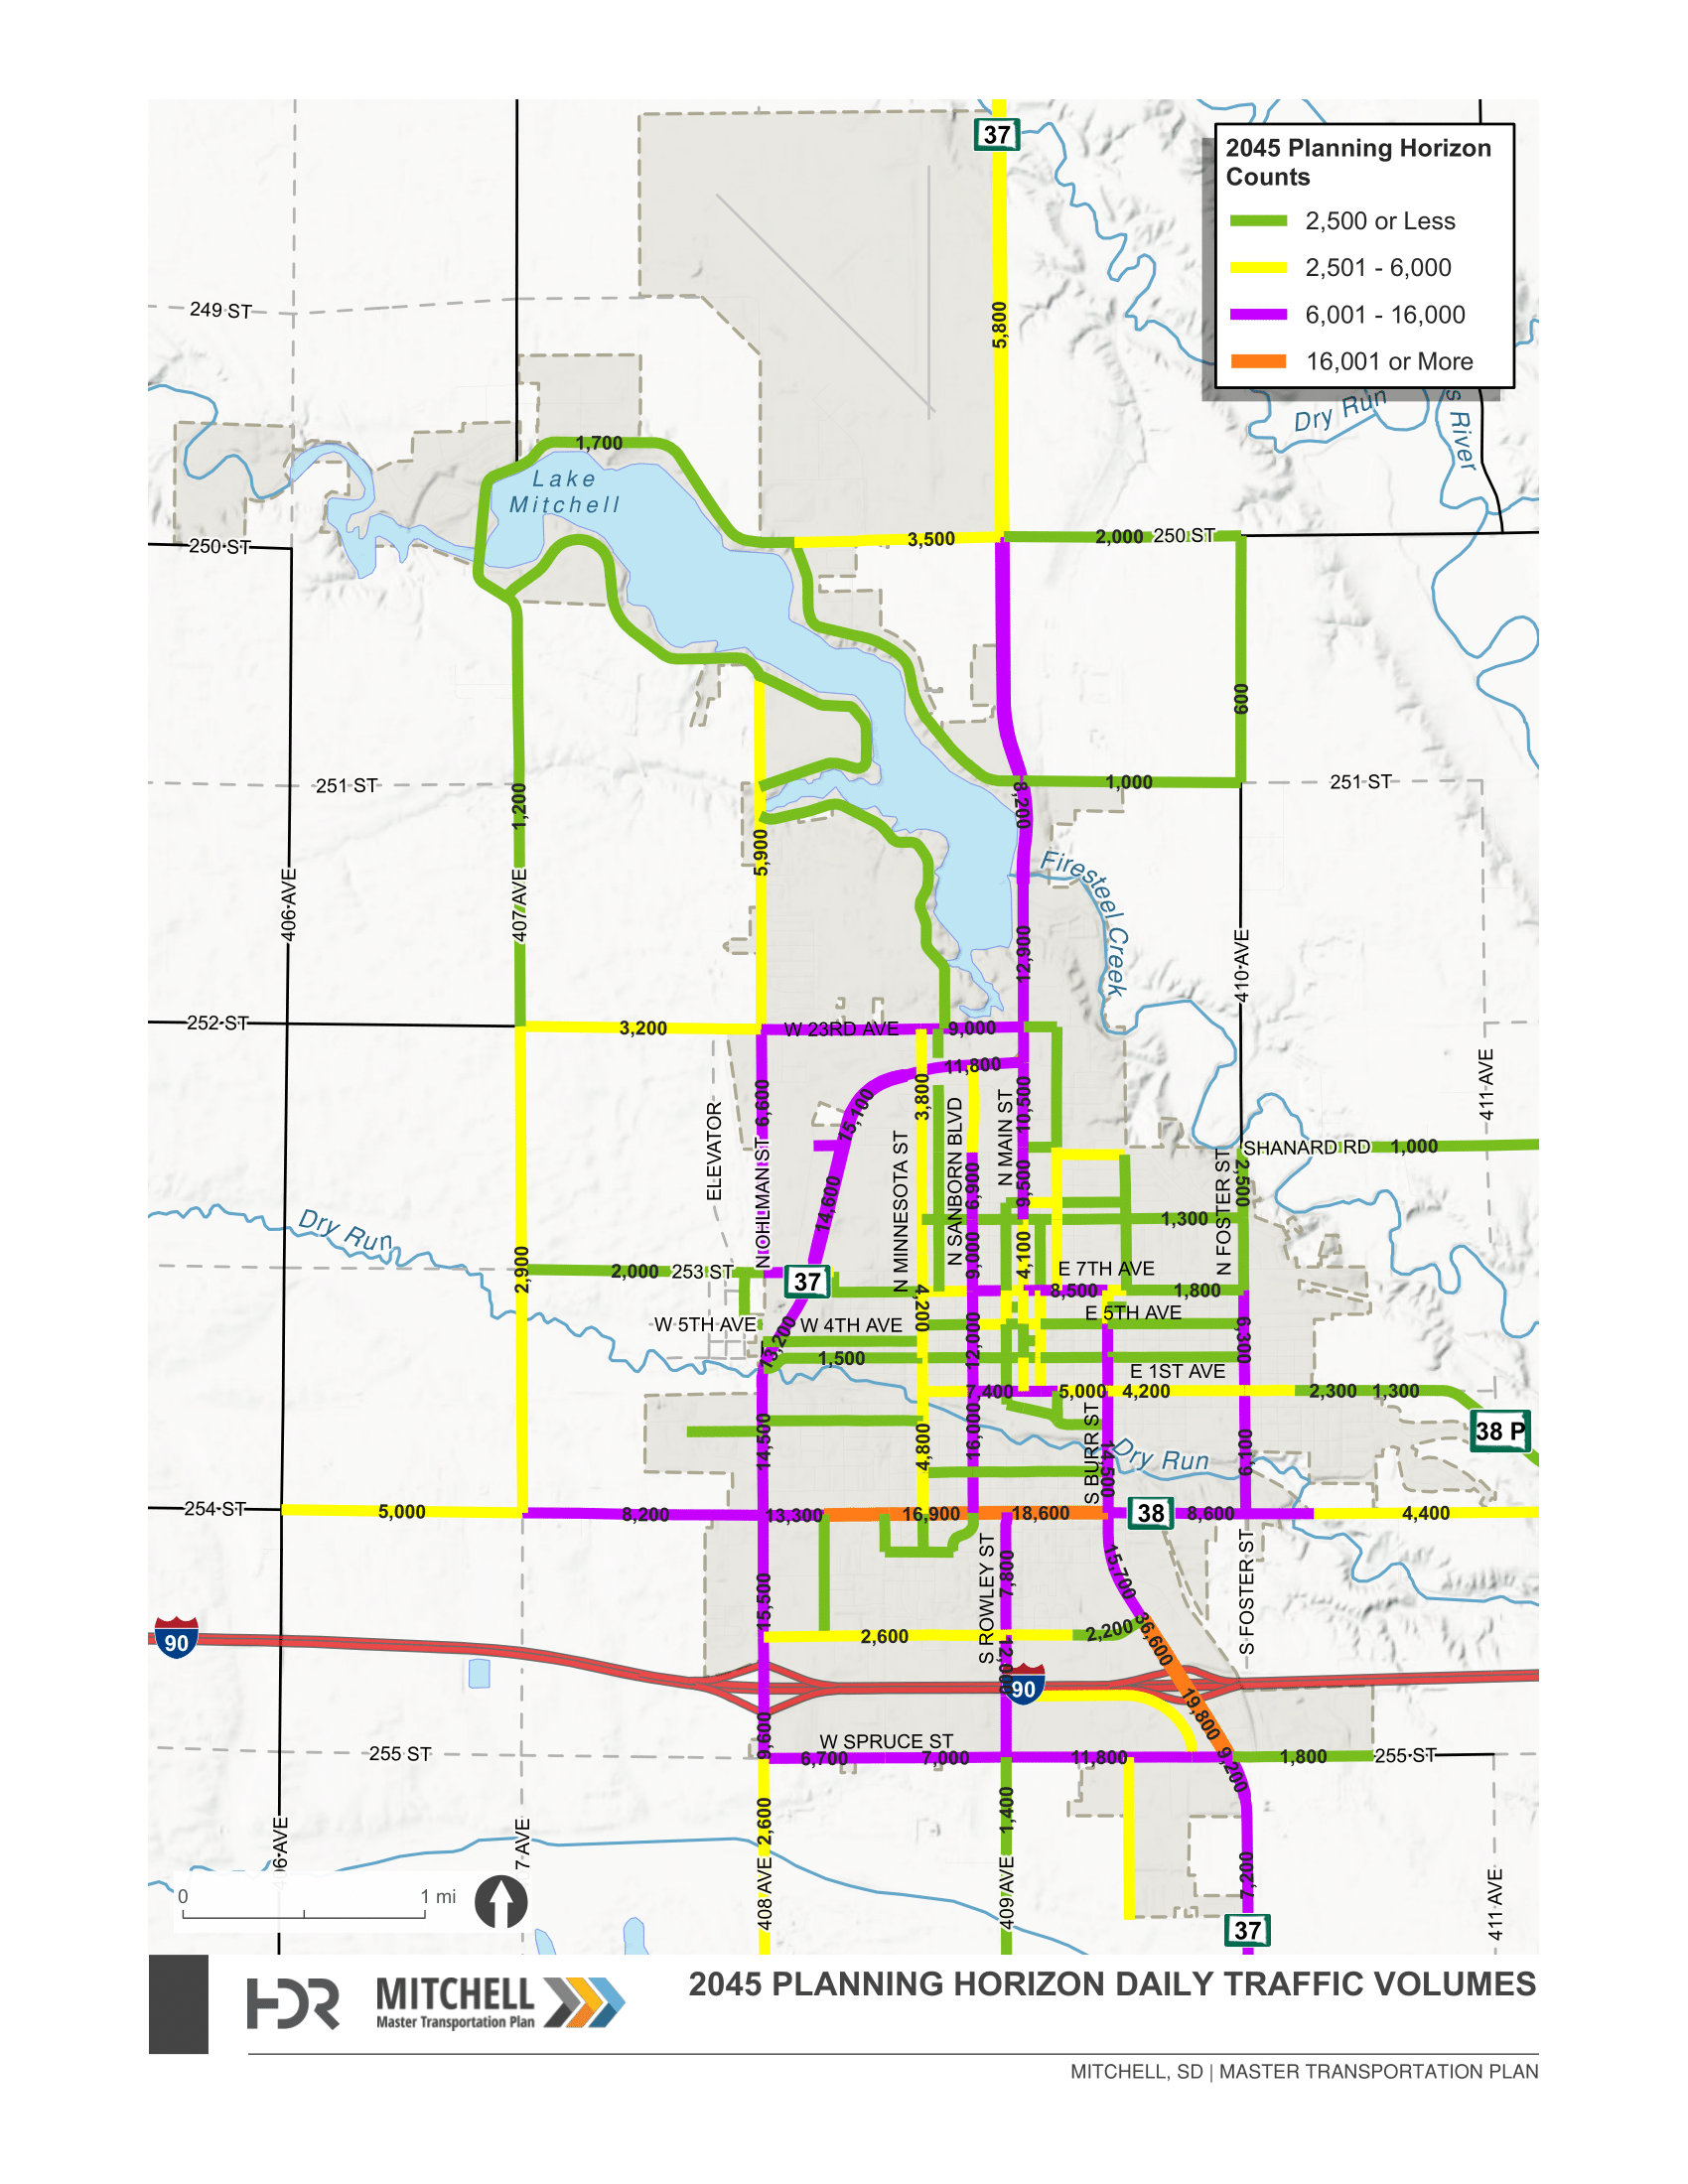 Summary of forecasted traffic volumes throughout the Mitchell area. Forecasts reflect an estimate of the 20-year planning horizon (2045) traffic growth, accounting for general traffic growth and anticipated future development traffic.